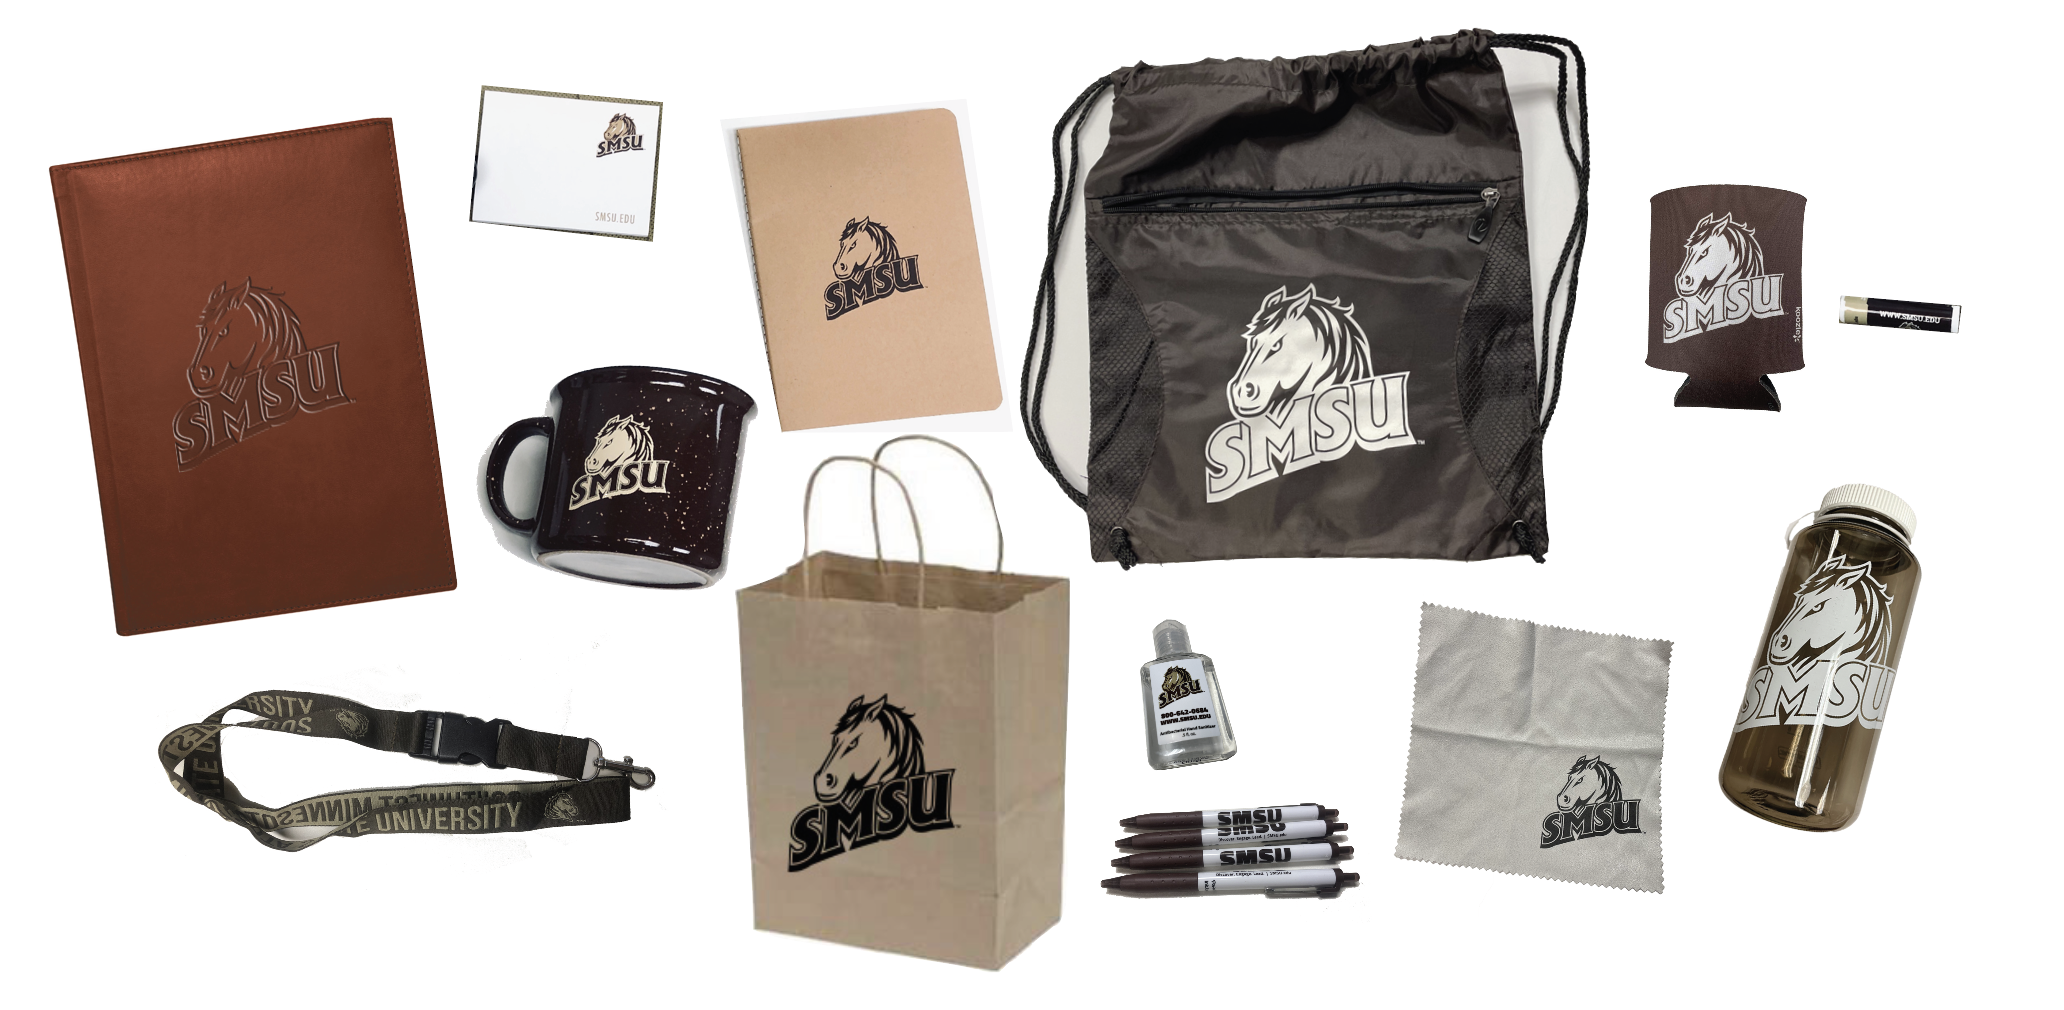 Image showing a sample of the promotional items available to SMSU Departments